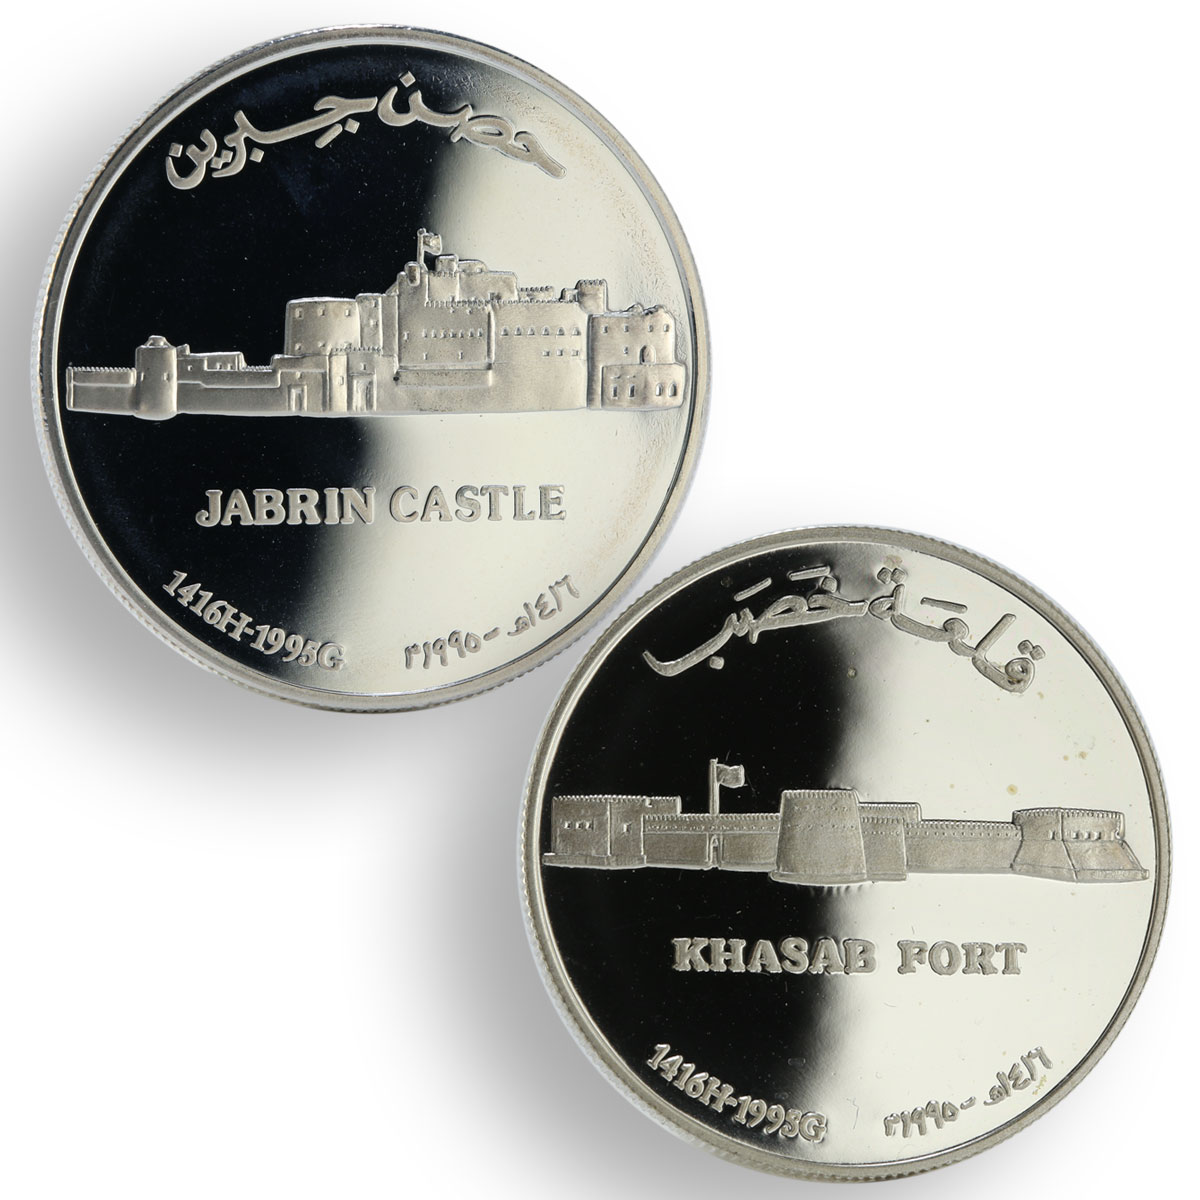 Oman set 2 coins Jabrin Castle and Khasab Fort proof silver coin 1995